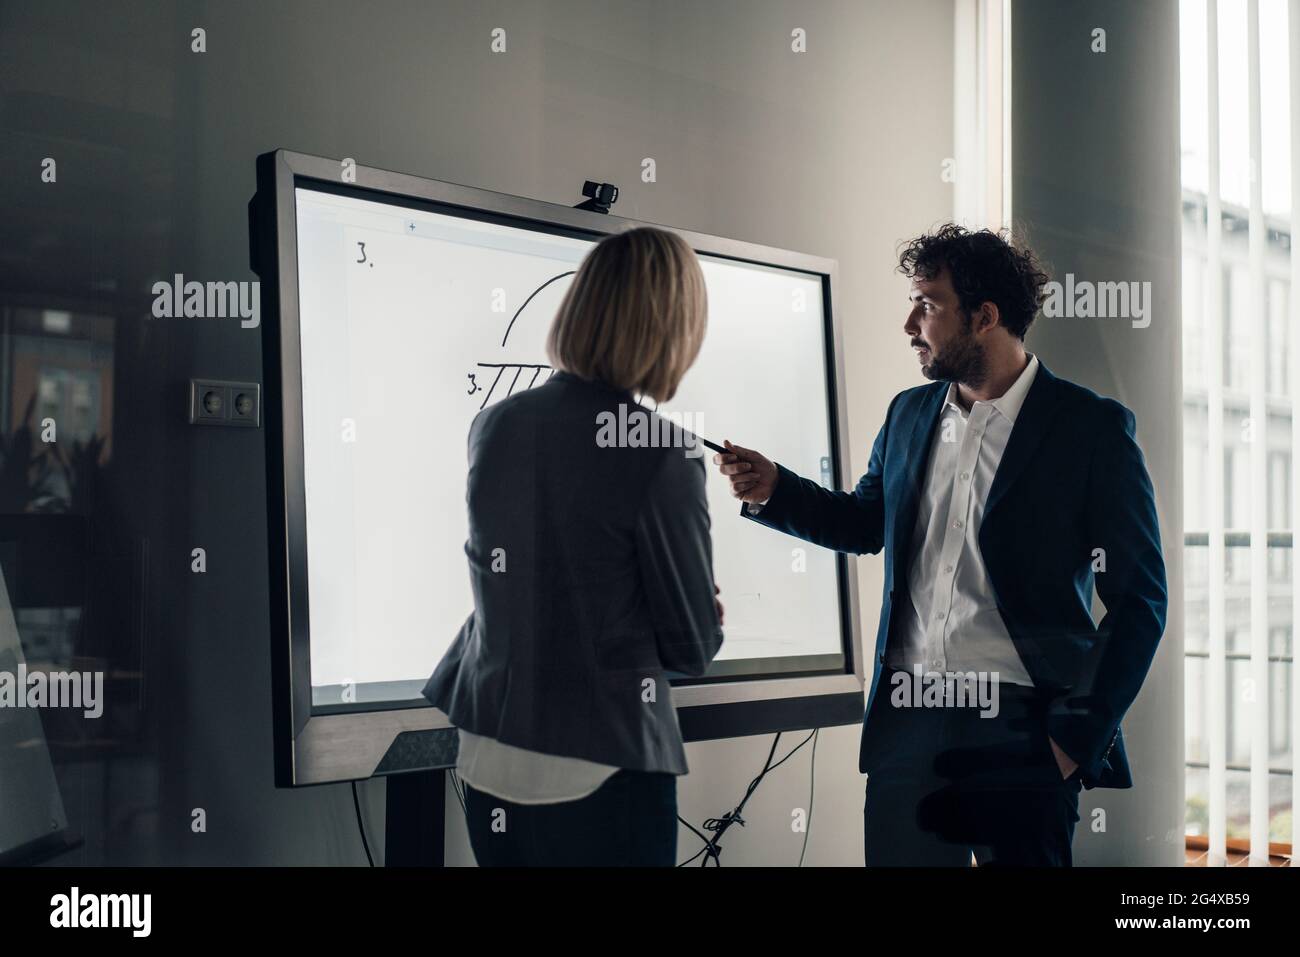 Professional team working together on projection screen at office Stock Photo